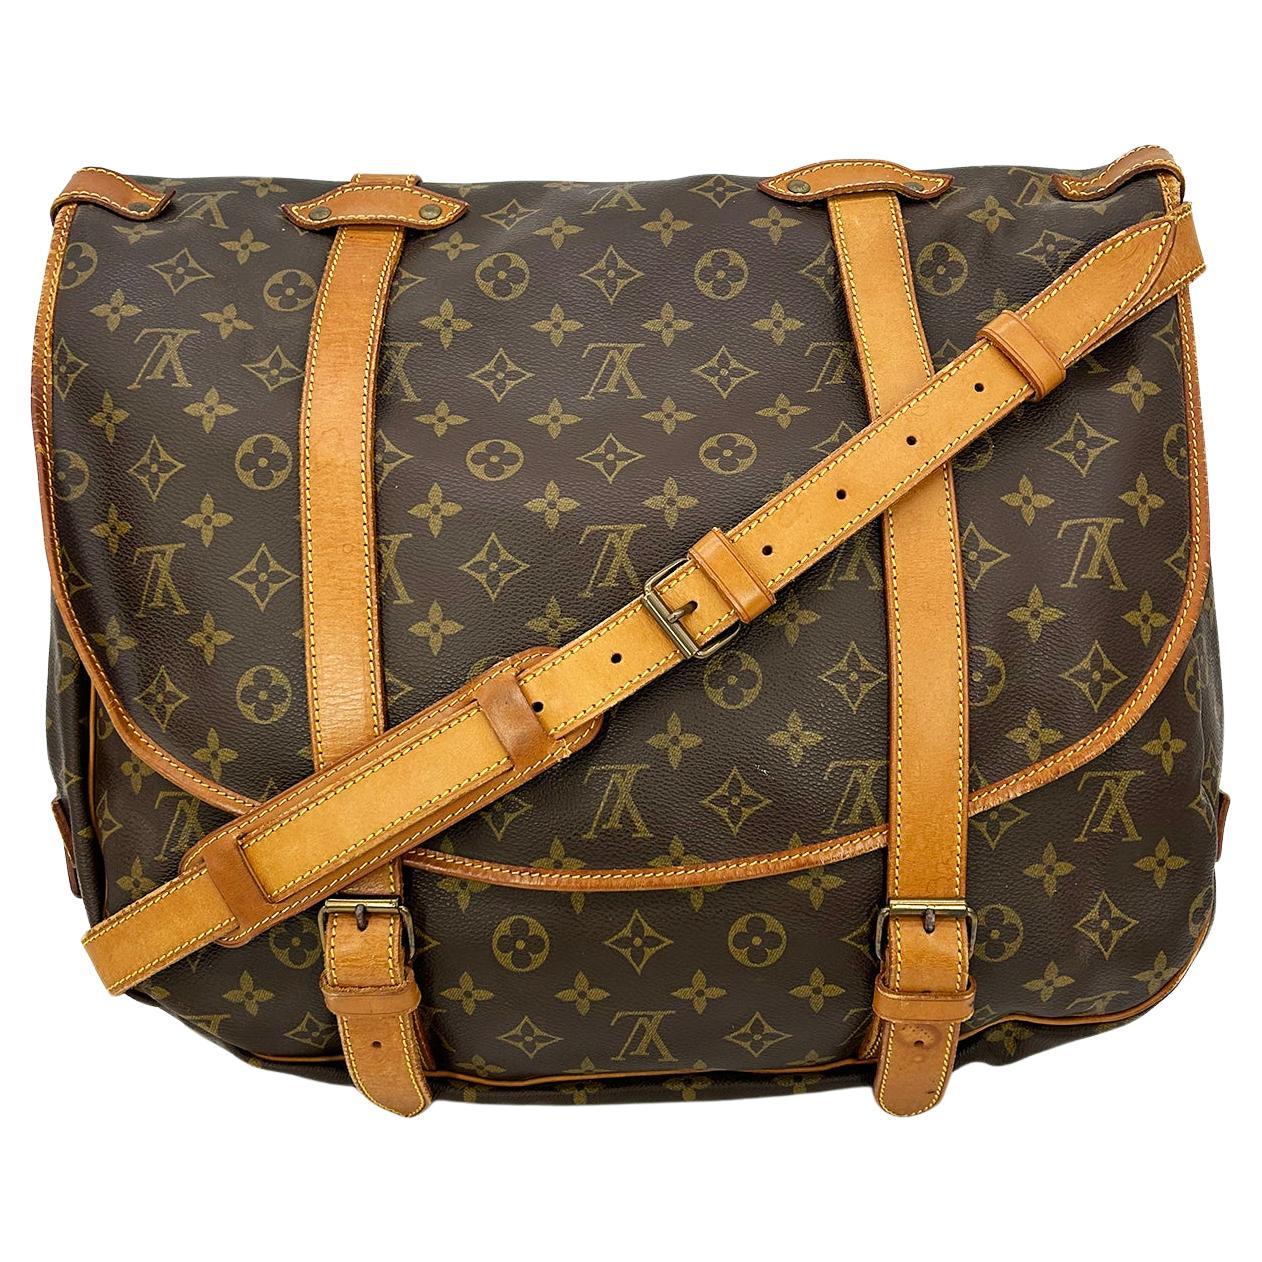 Can you fit a laptop in a Louis Vuitton bag?